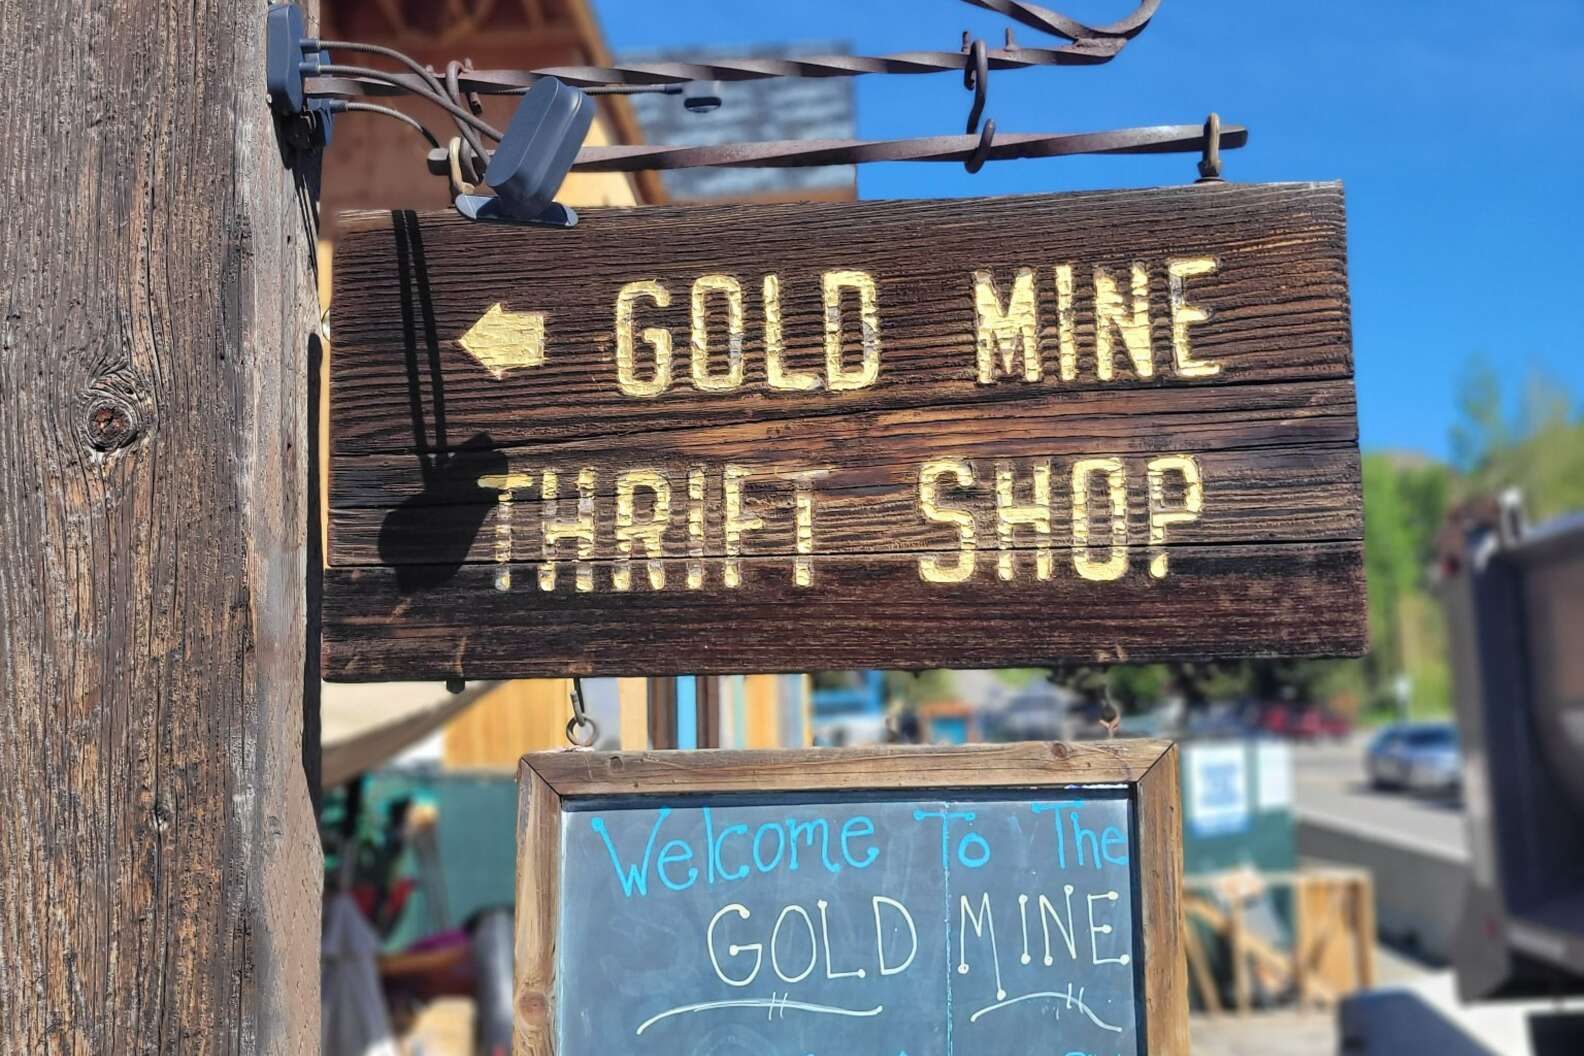 The Gold Mine Thrift Store